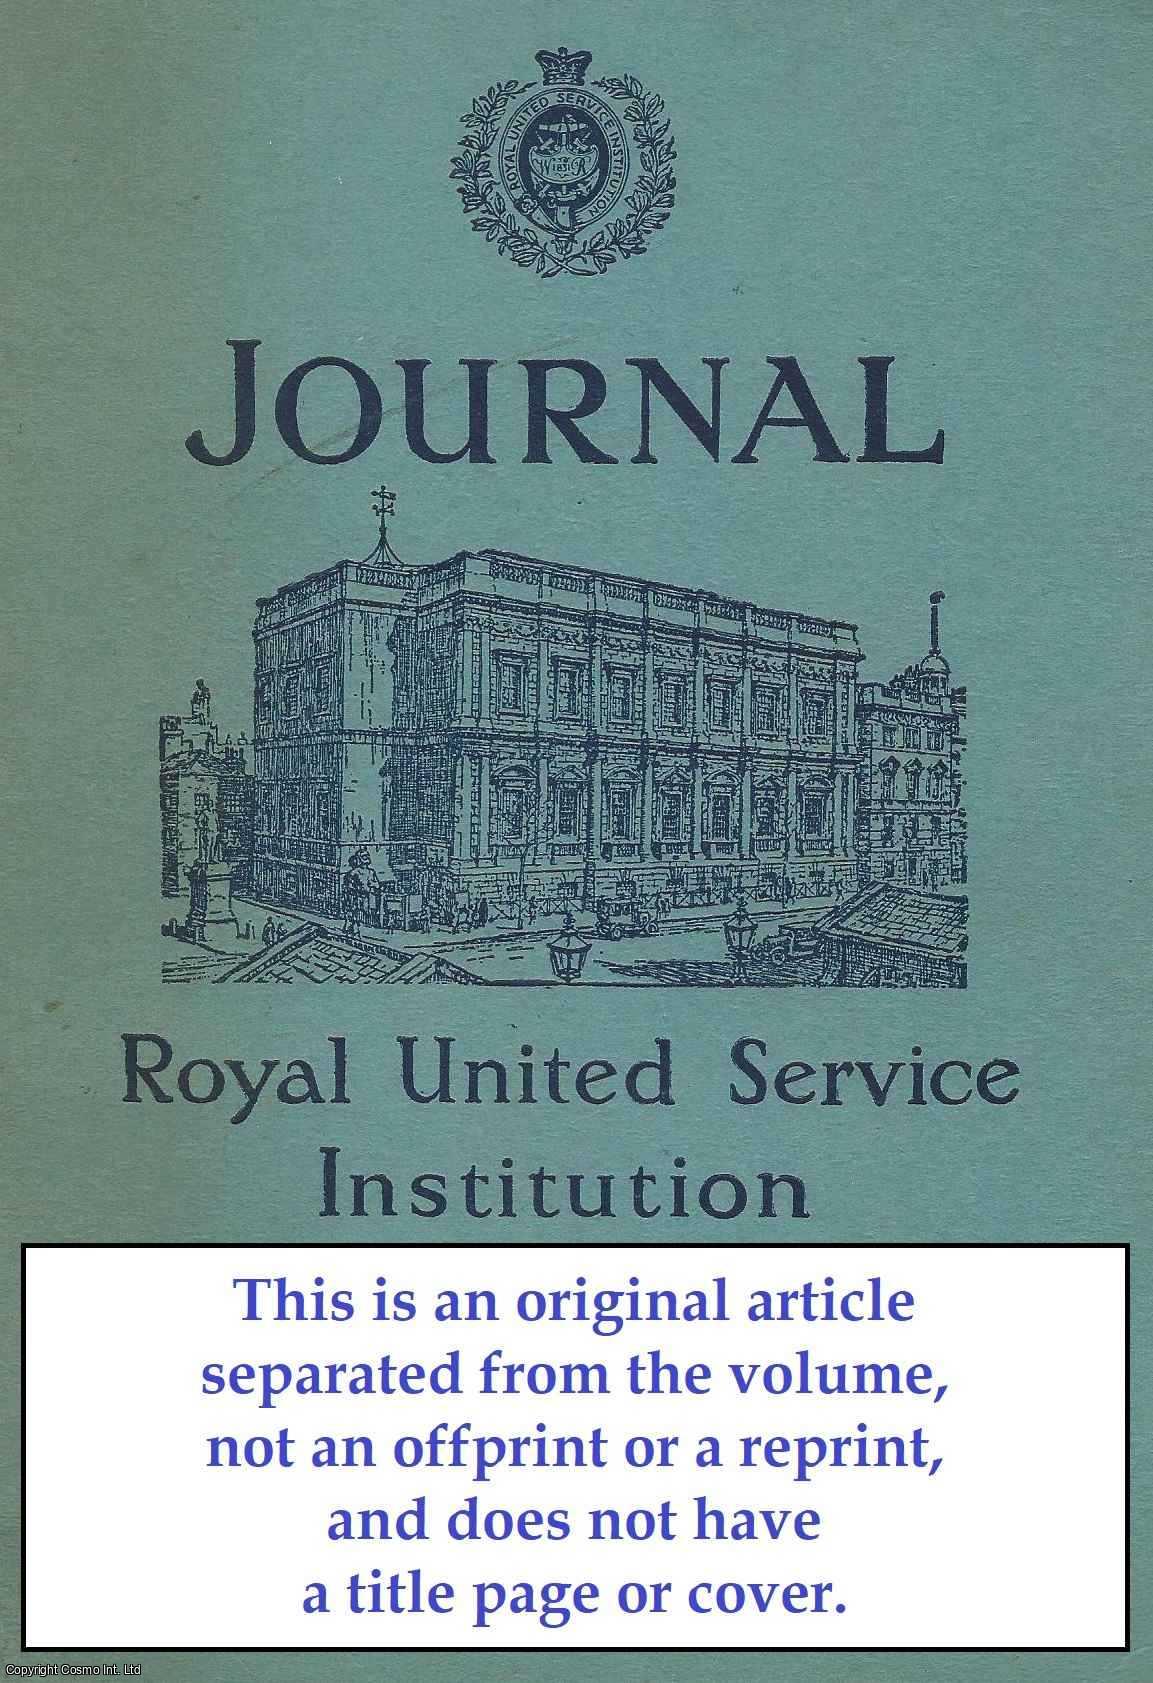 O. R. - Soldier to Civilian. An original article from Journal of The Royal United Service Institution, 1958.